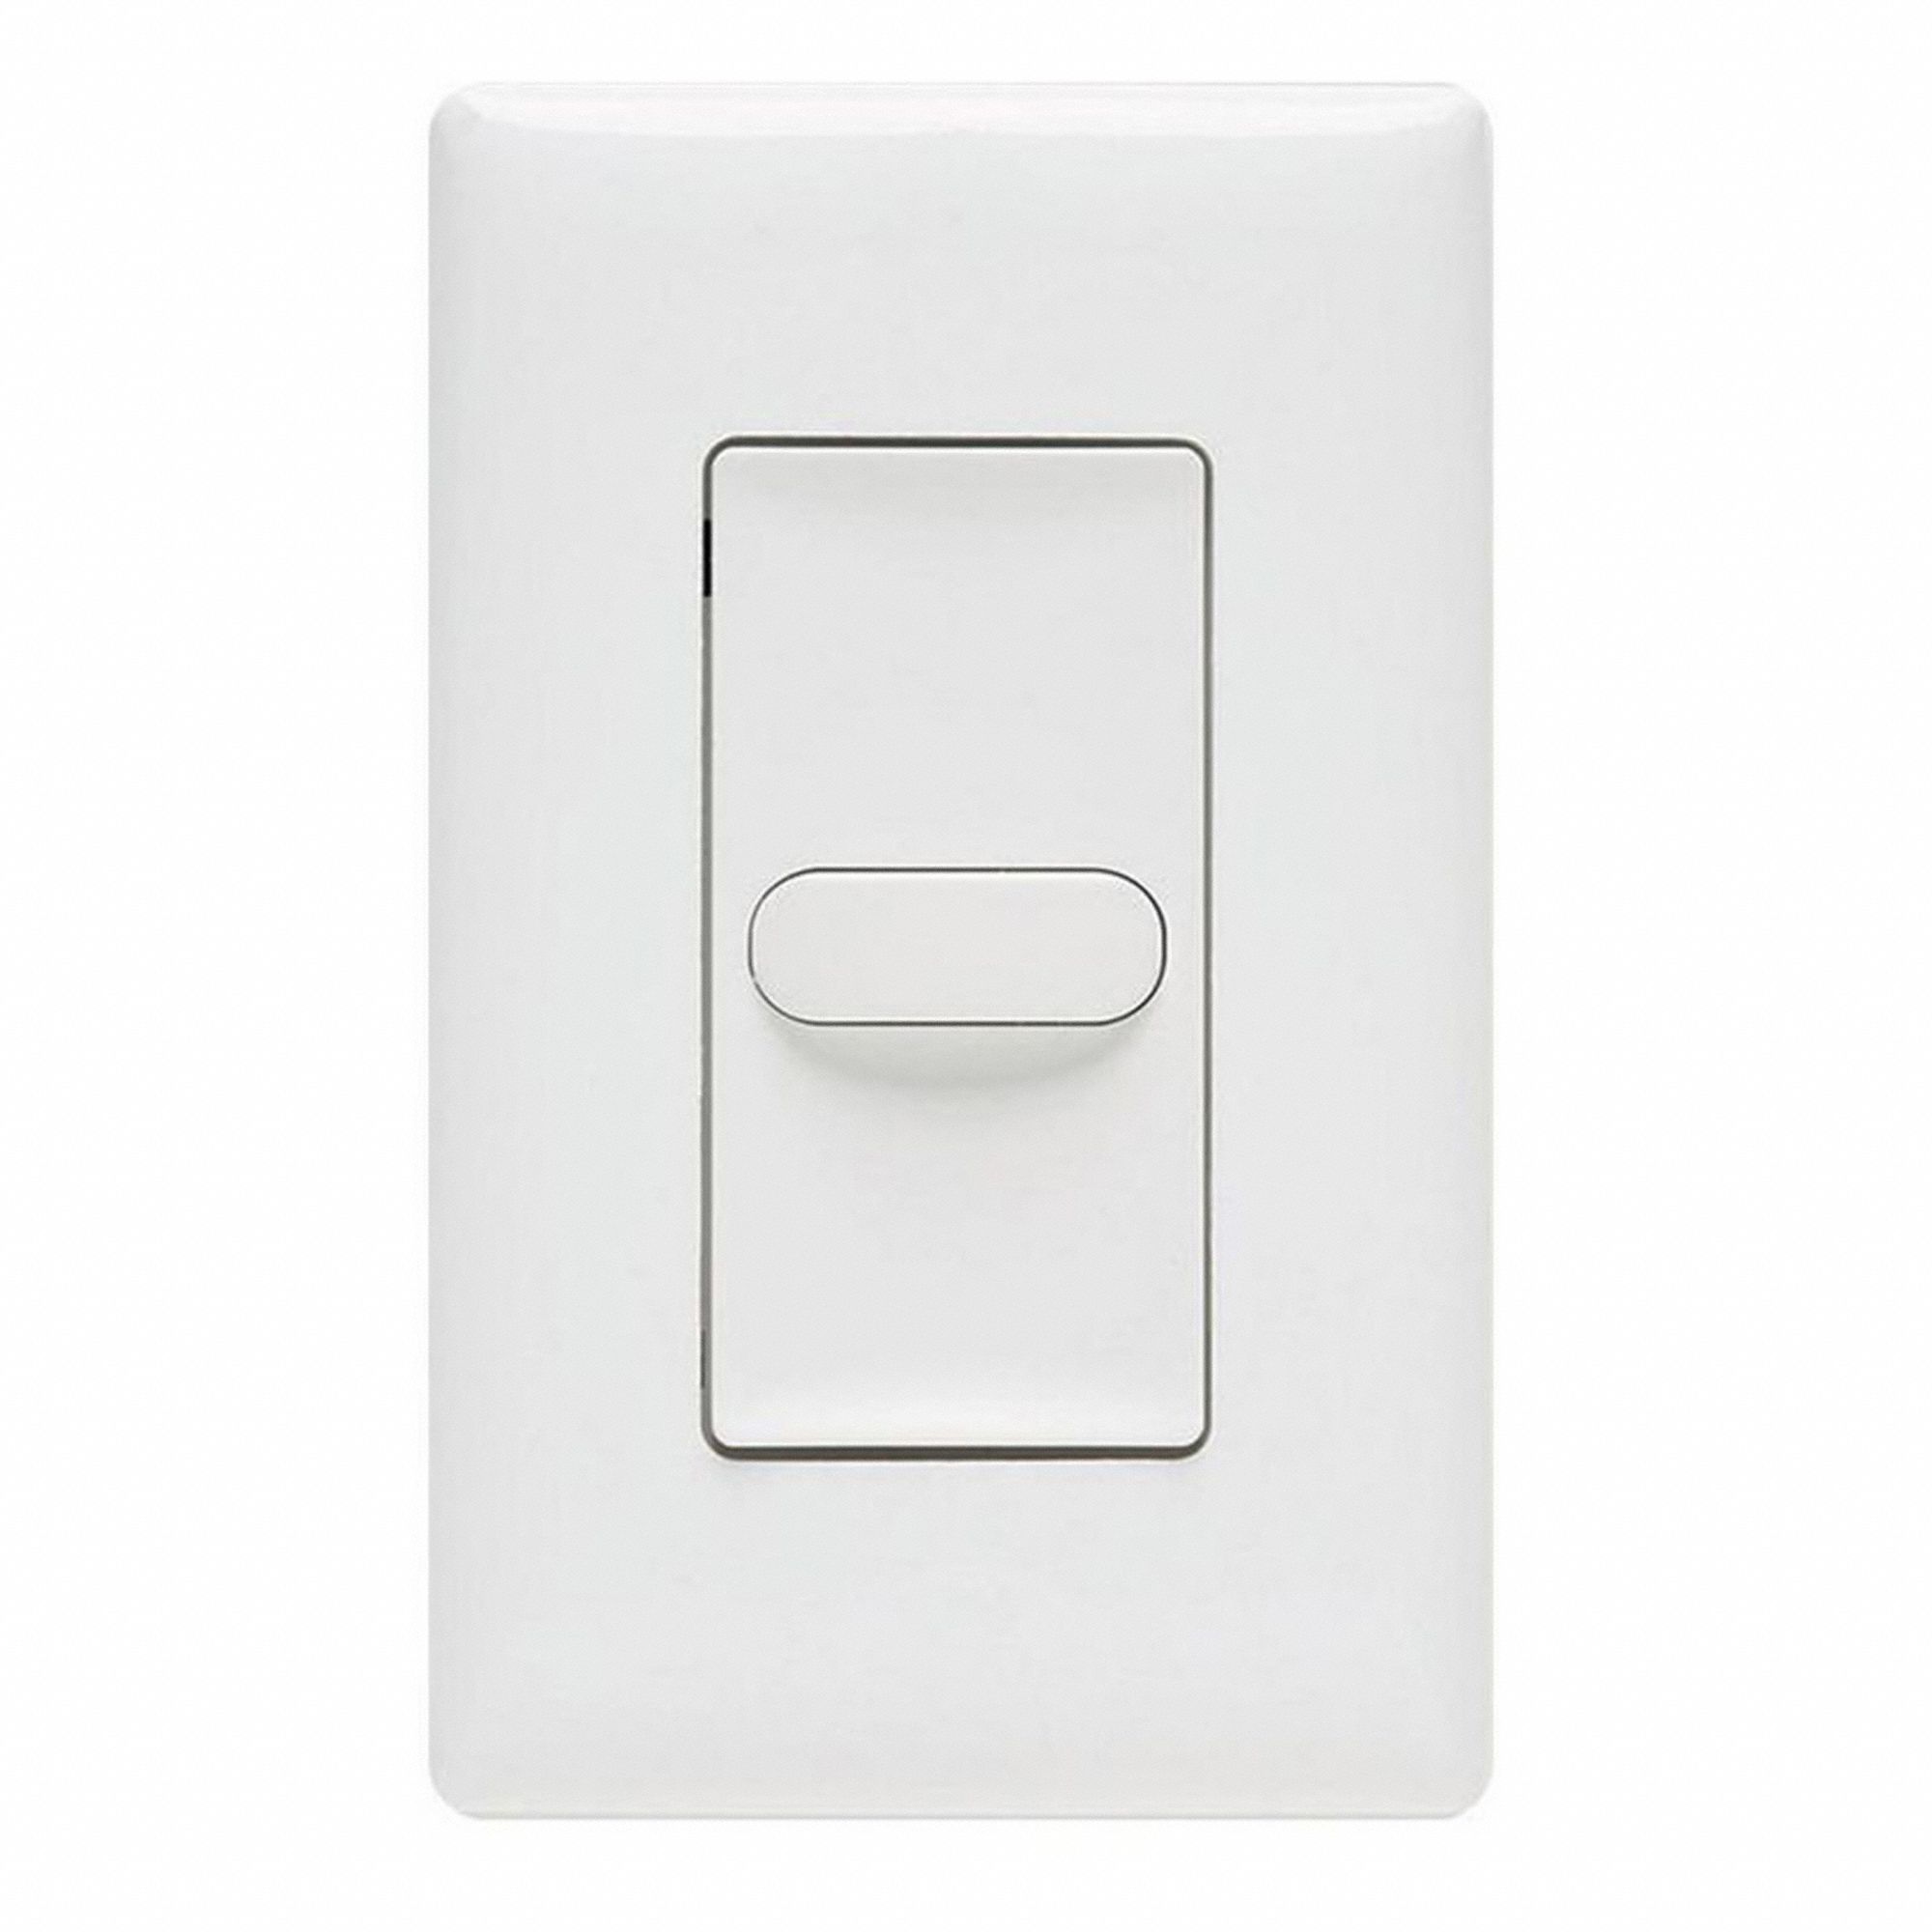 LOW-VOLT MOMENTARY WALL SWITCH C/W PILOT